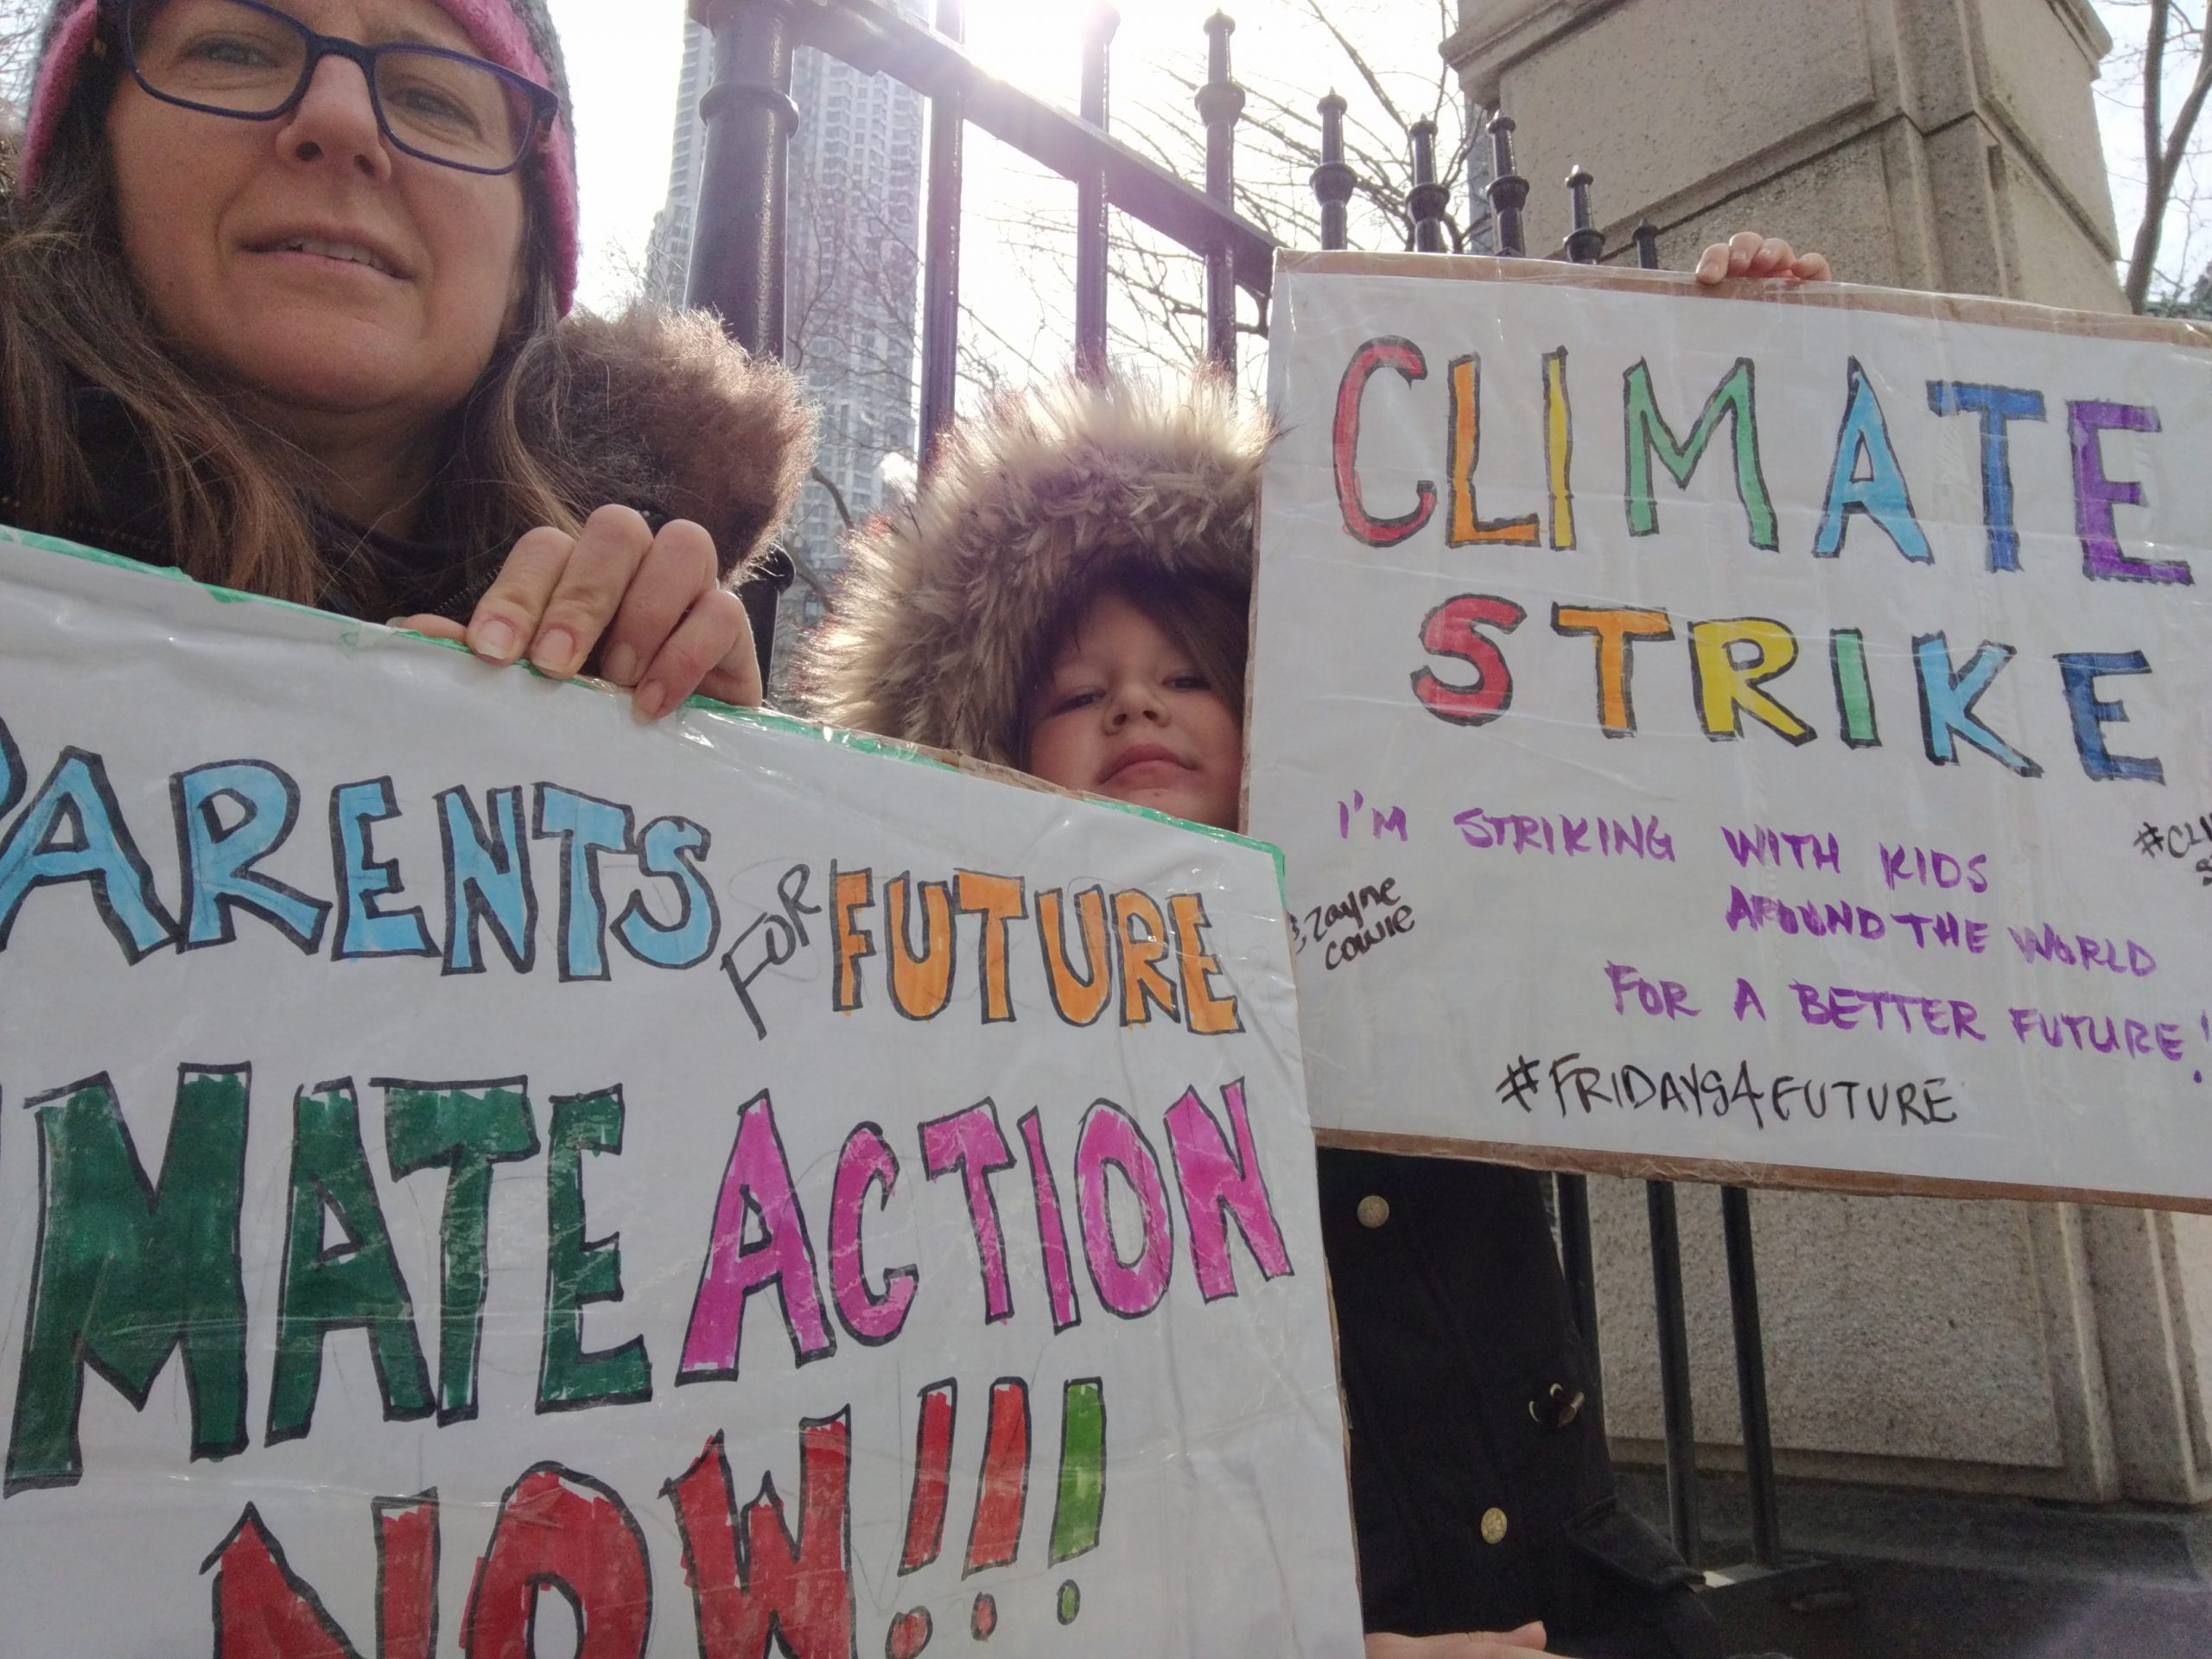 A mom and son hold climate strike signs wearing winter coats